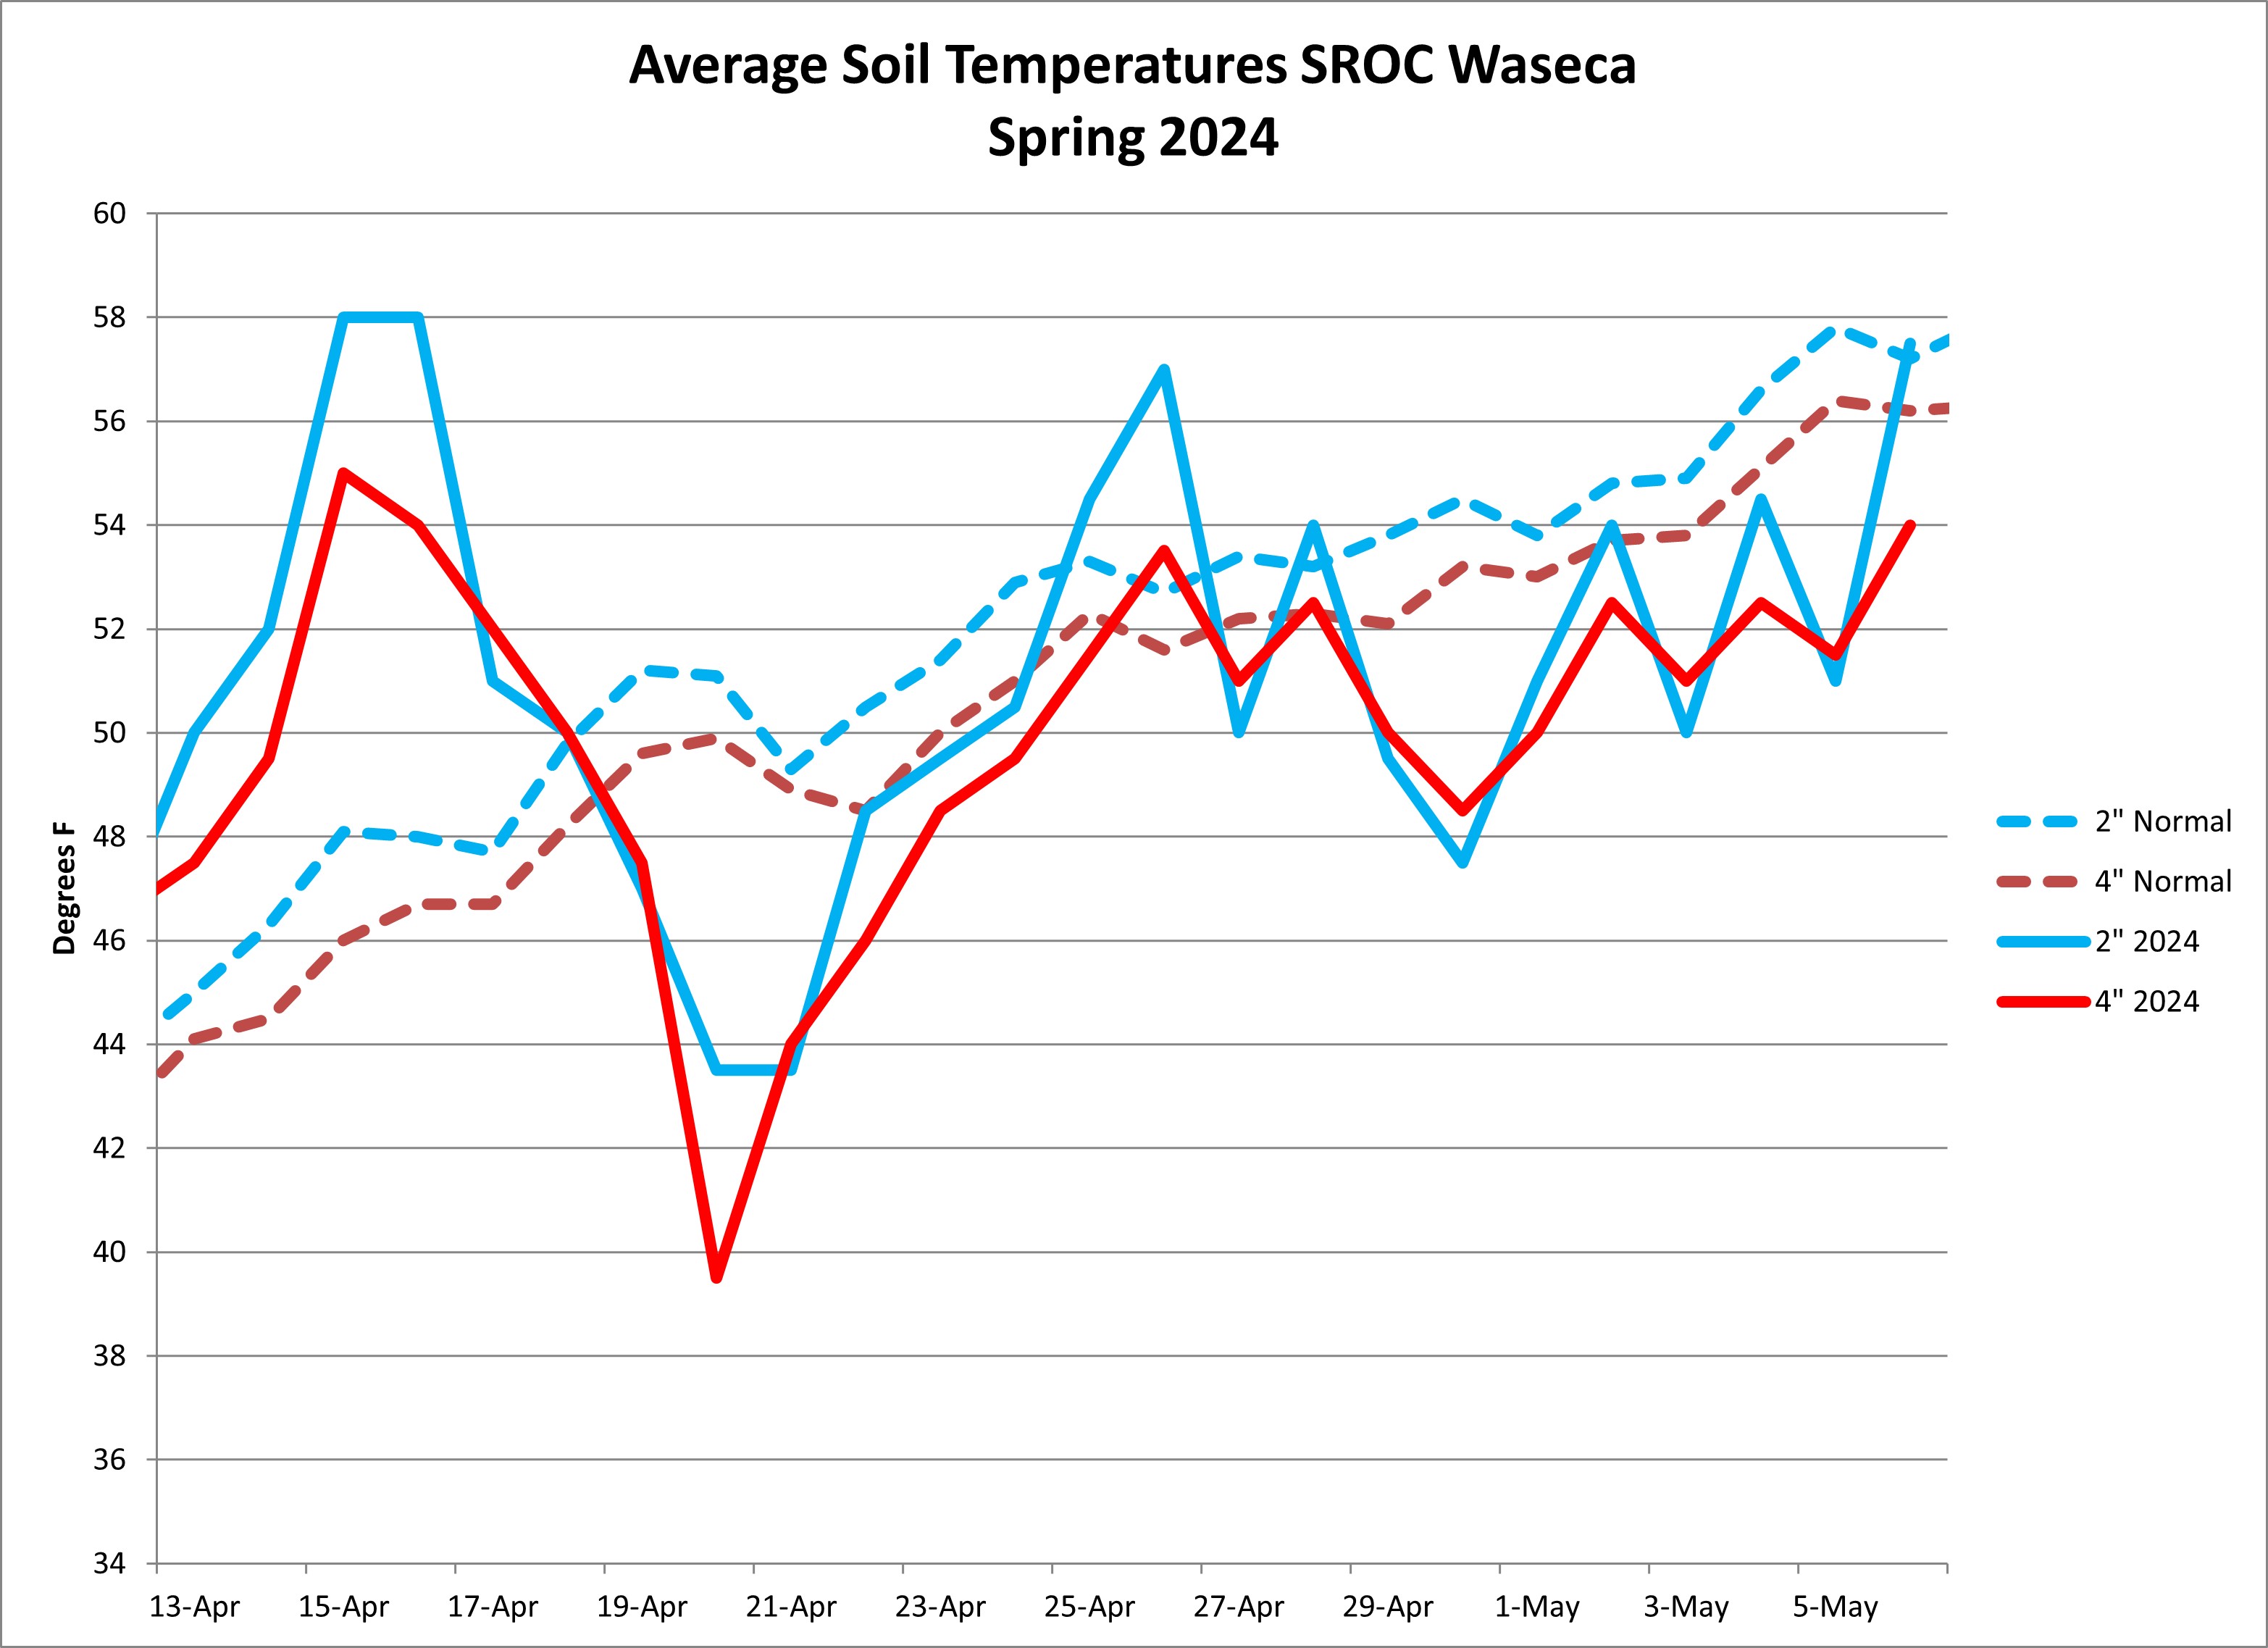 A graph showing avg soil temperatures in Waseca, MN in spring 2024.